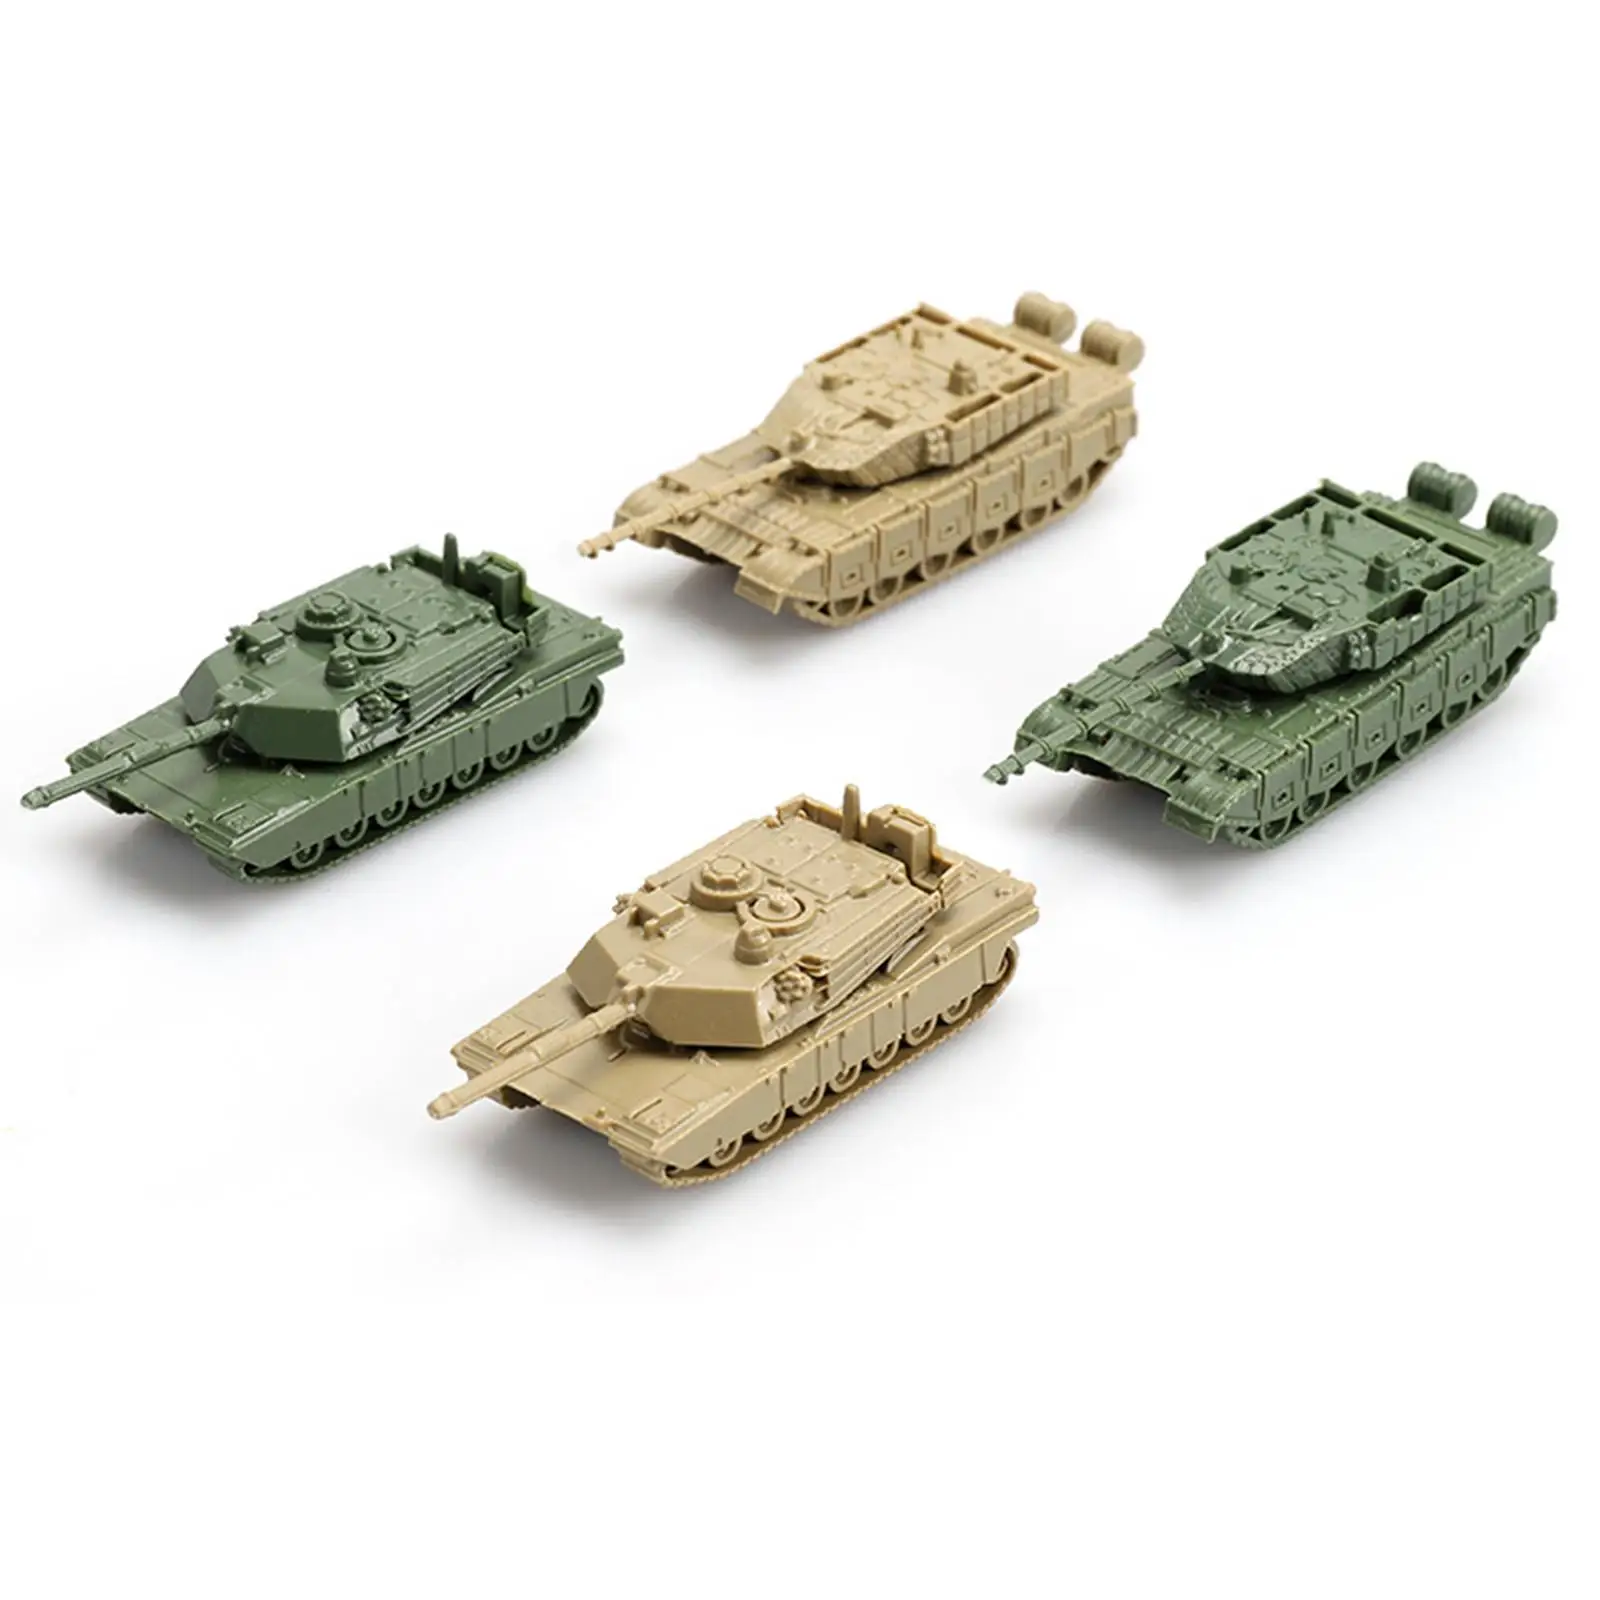 1:144 Scale Static Tanks Ornaments Collectibles Party Favors Toy Building Kits Paper Craft 3D Puzzle for Boy and Girl Beginners